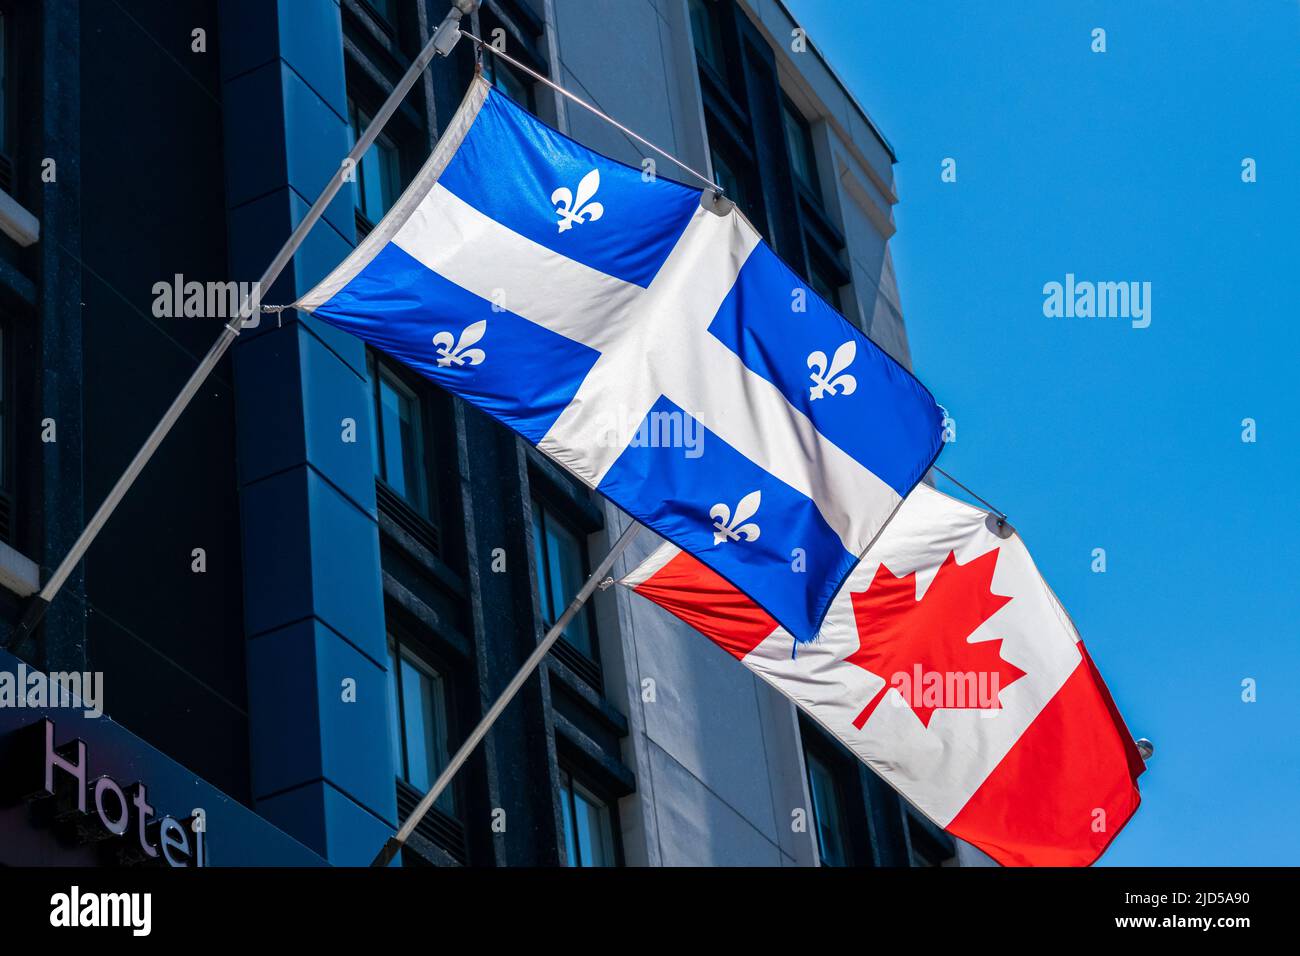 Canada and Quebec flags waving on a hotel facade Stock Photo